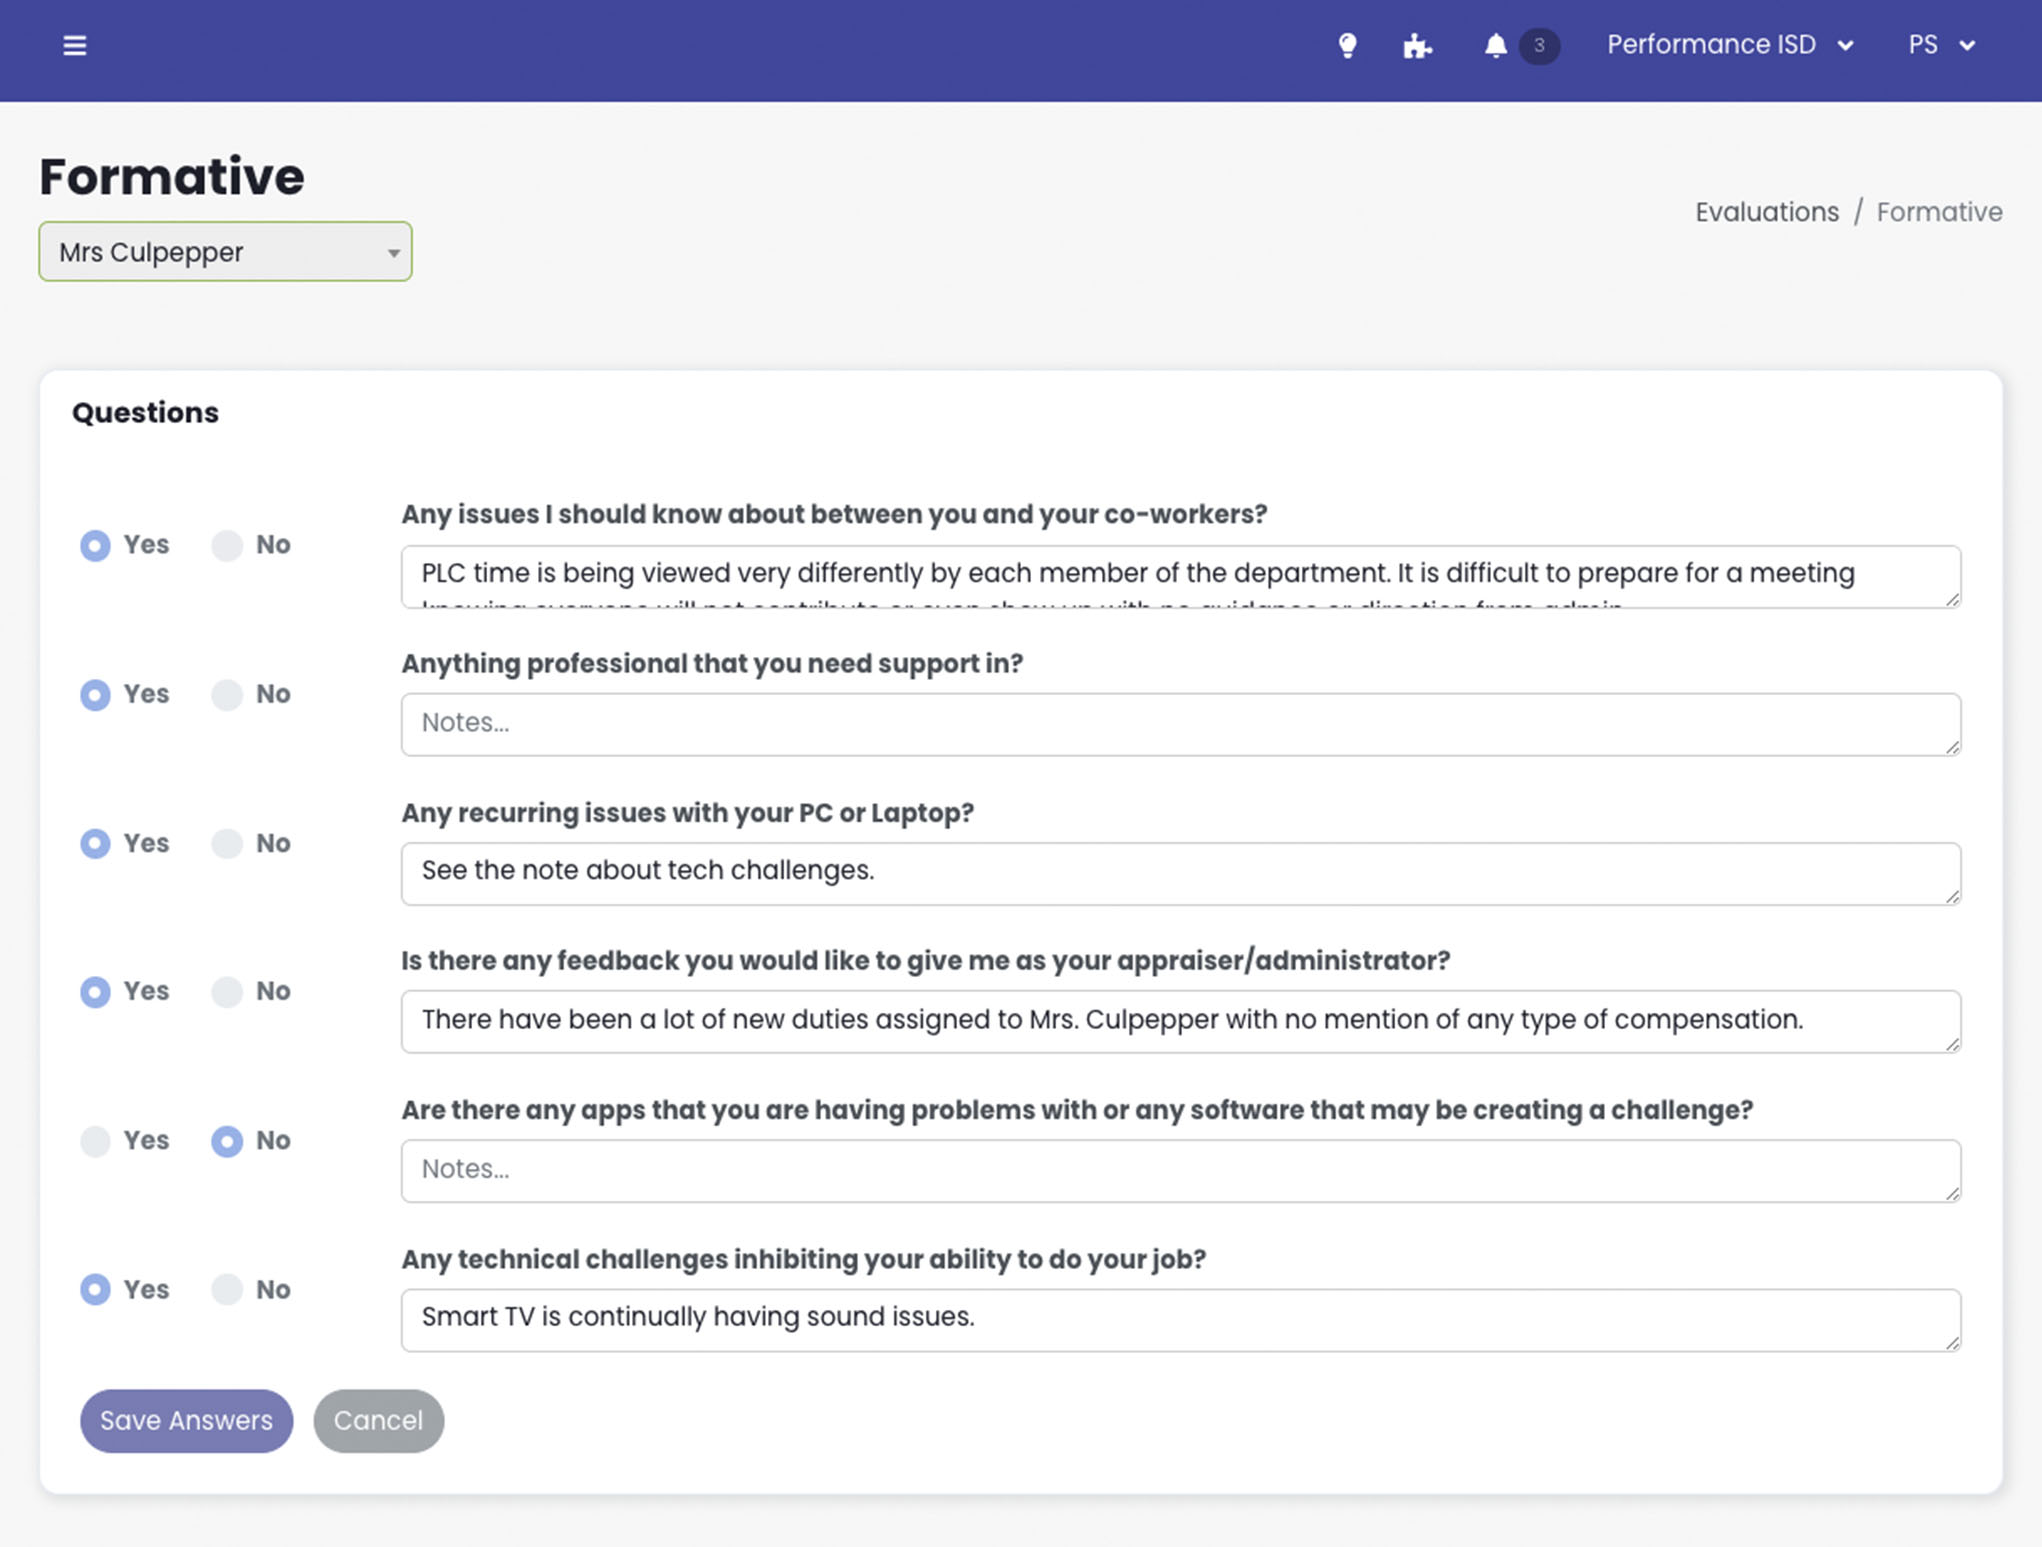 LoopSpire's real-time feedback tools provide stakeholders at all levels with a platform to deliver specific, in-the-moment feedback that can direct needed improvements.